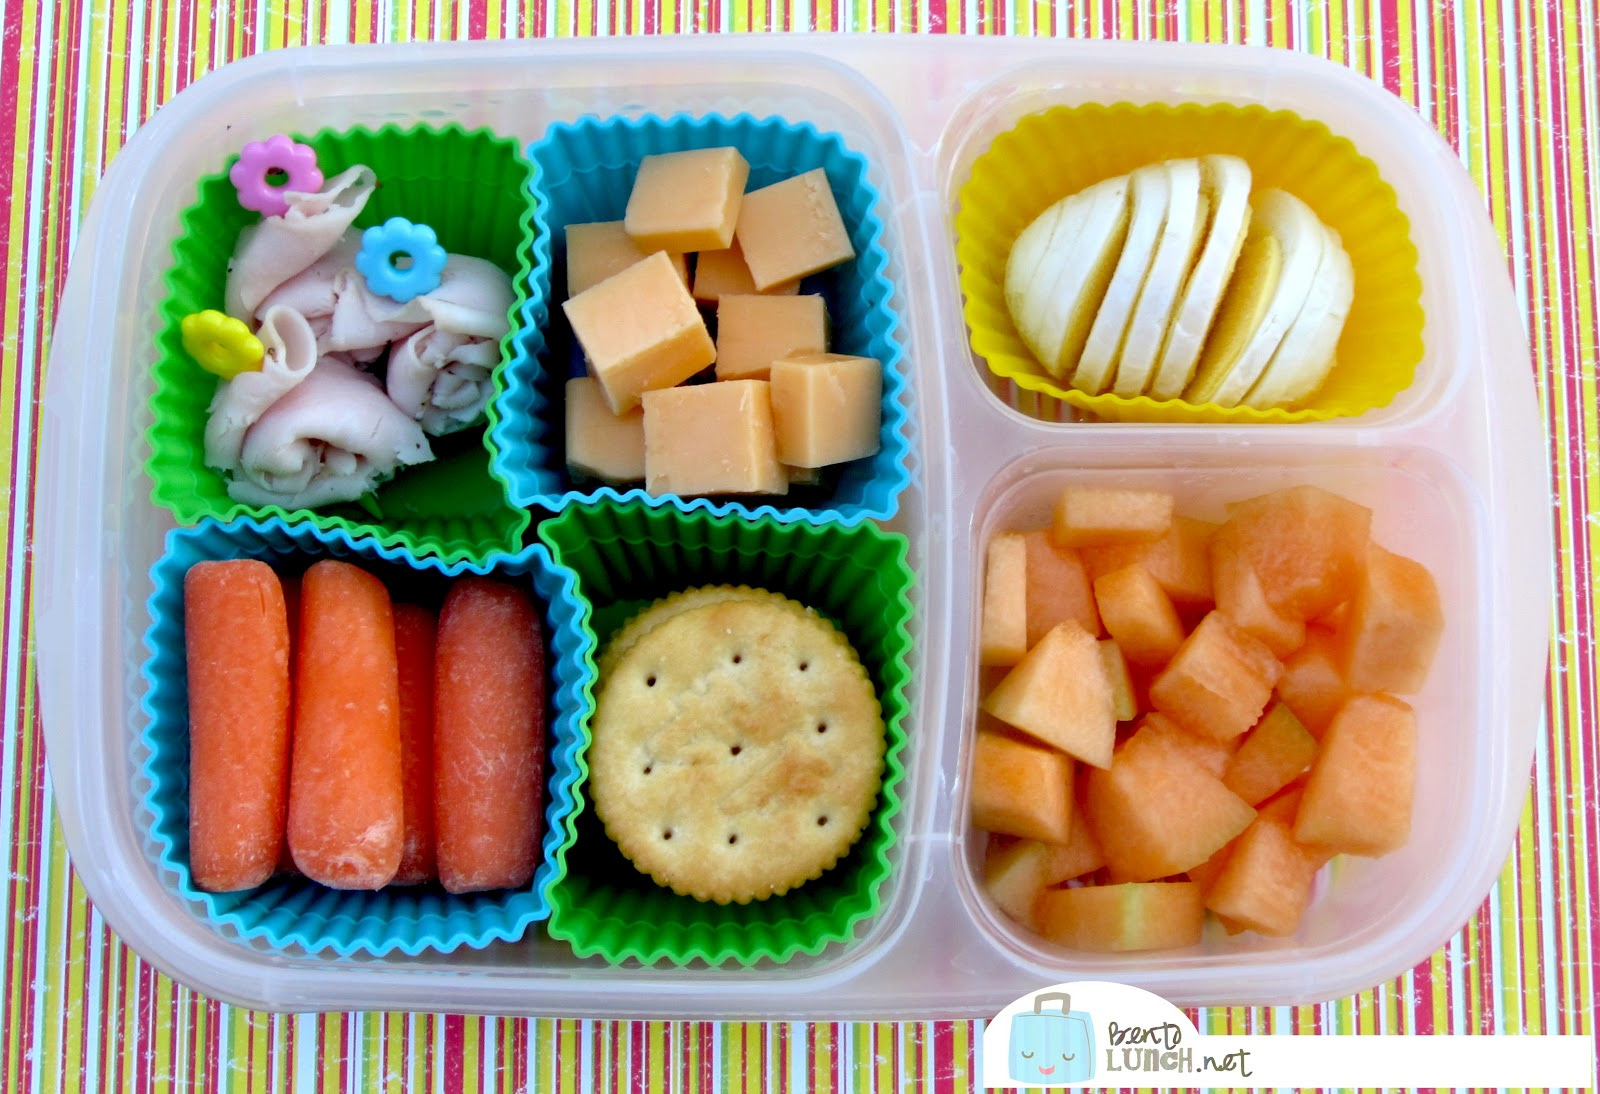 How To Make Homemade Lunchables - Healthy Family Project